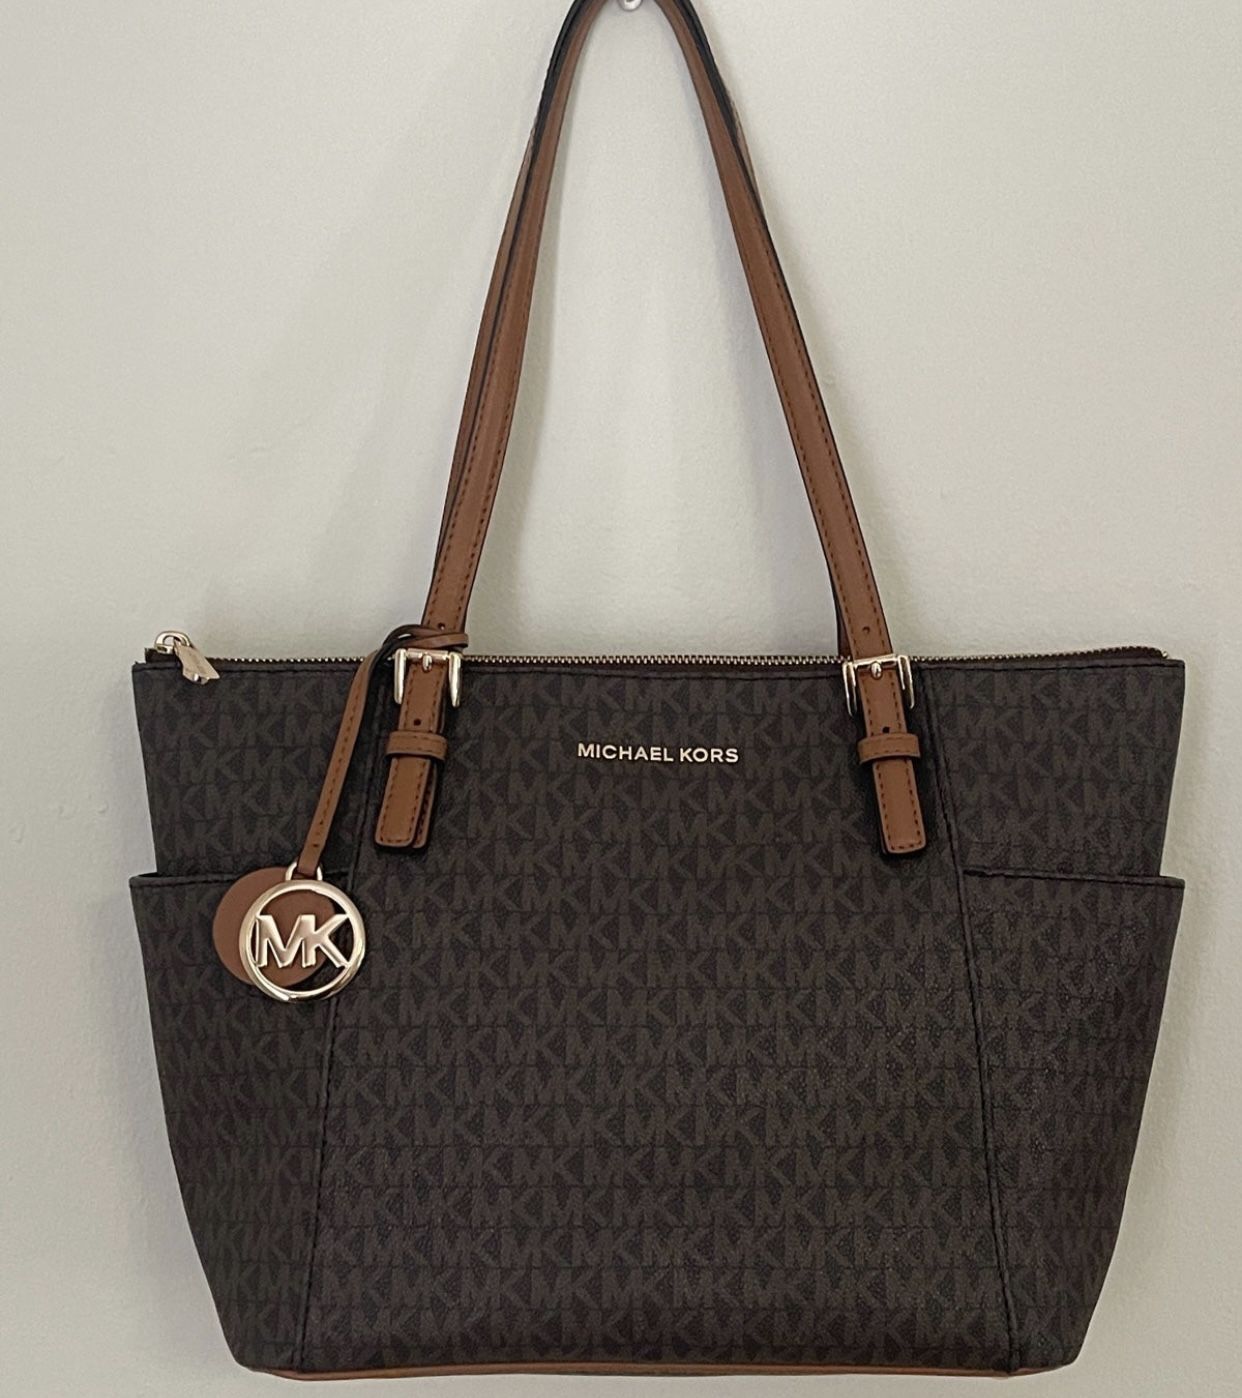 Michael Kors jet Set Travel Tote for Sale in New York, NY - OfferUp